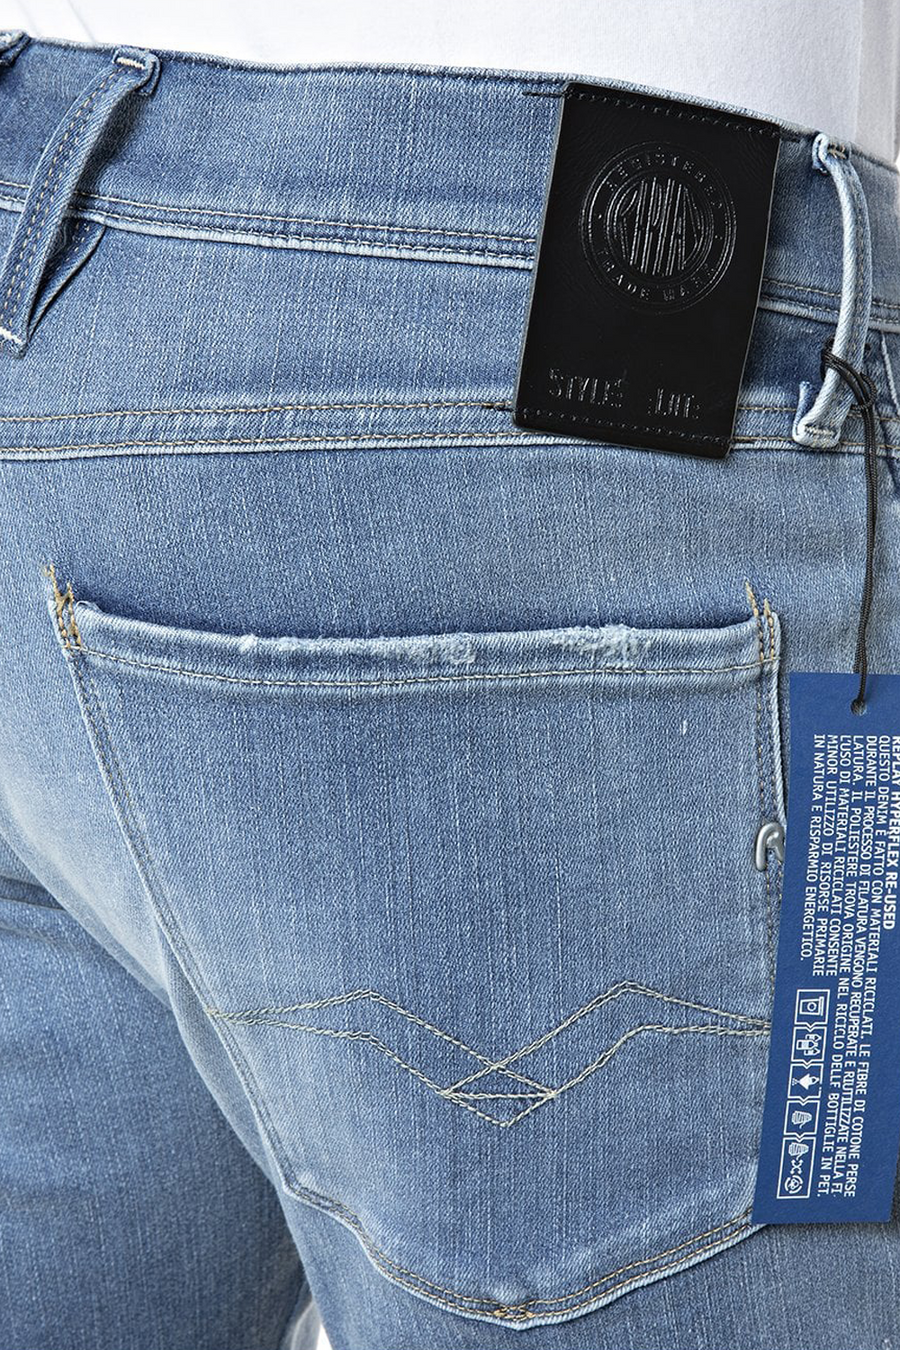 Buy the Replay Hyperflex Anbass Jean Blue at Intro. Spend £50 for free UK delivery. Official stockists. We ship worldwide.